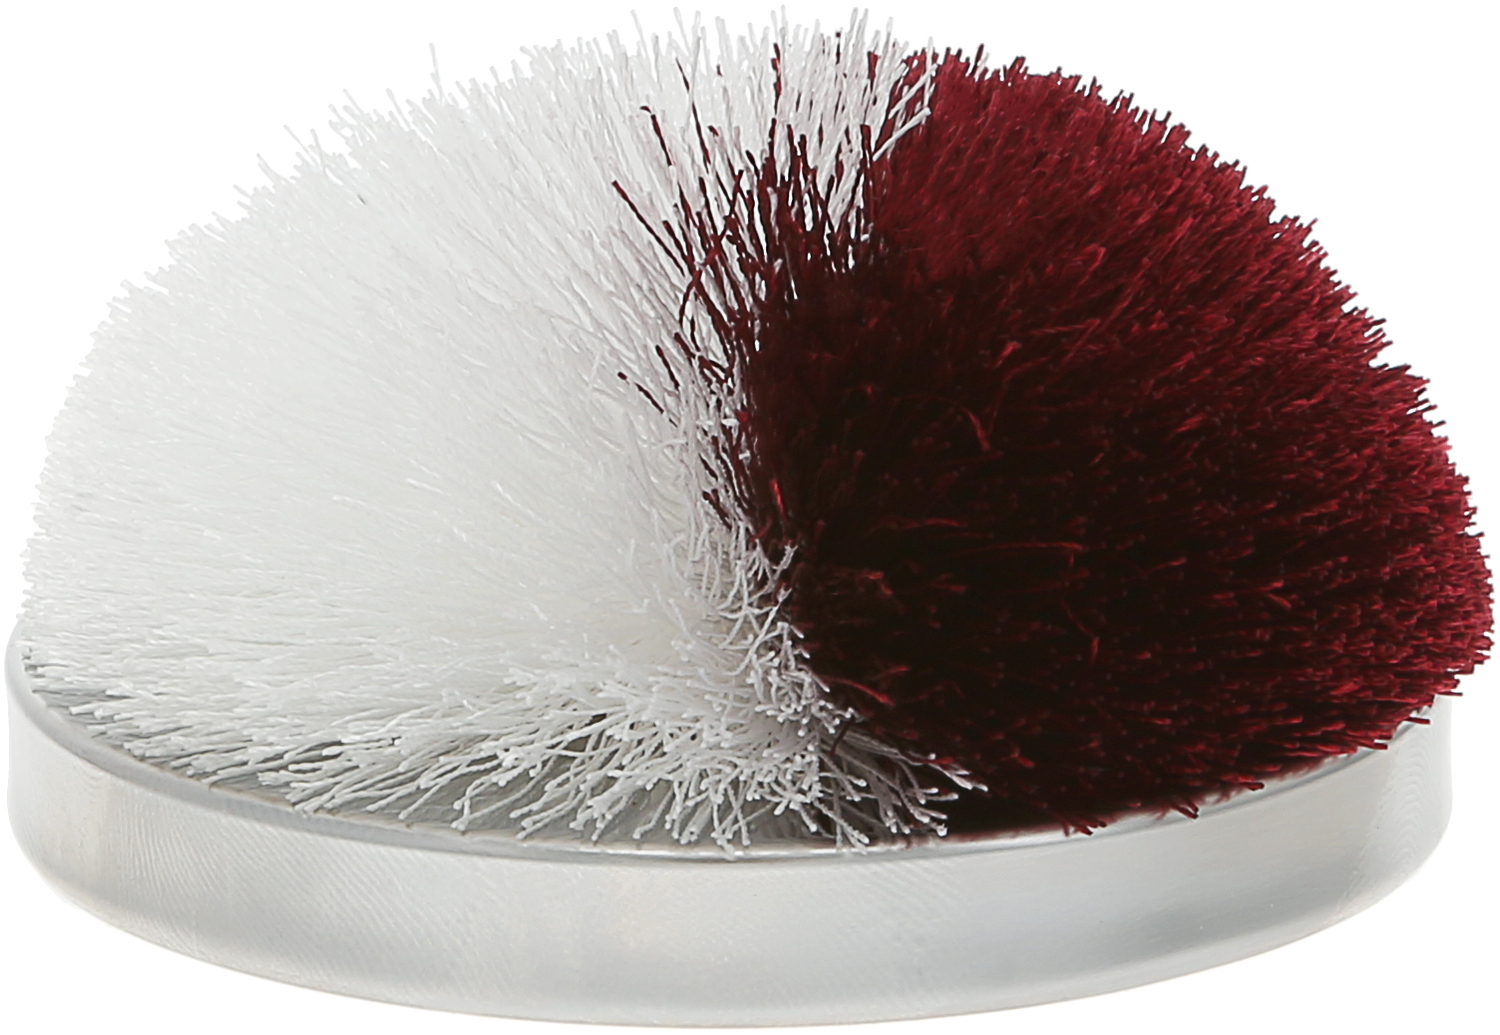 Maroon & White by Repre-Scent - Maroon & White - 2.75" Pom Pom Lid